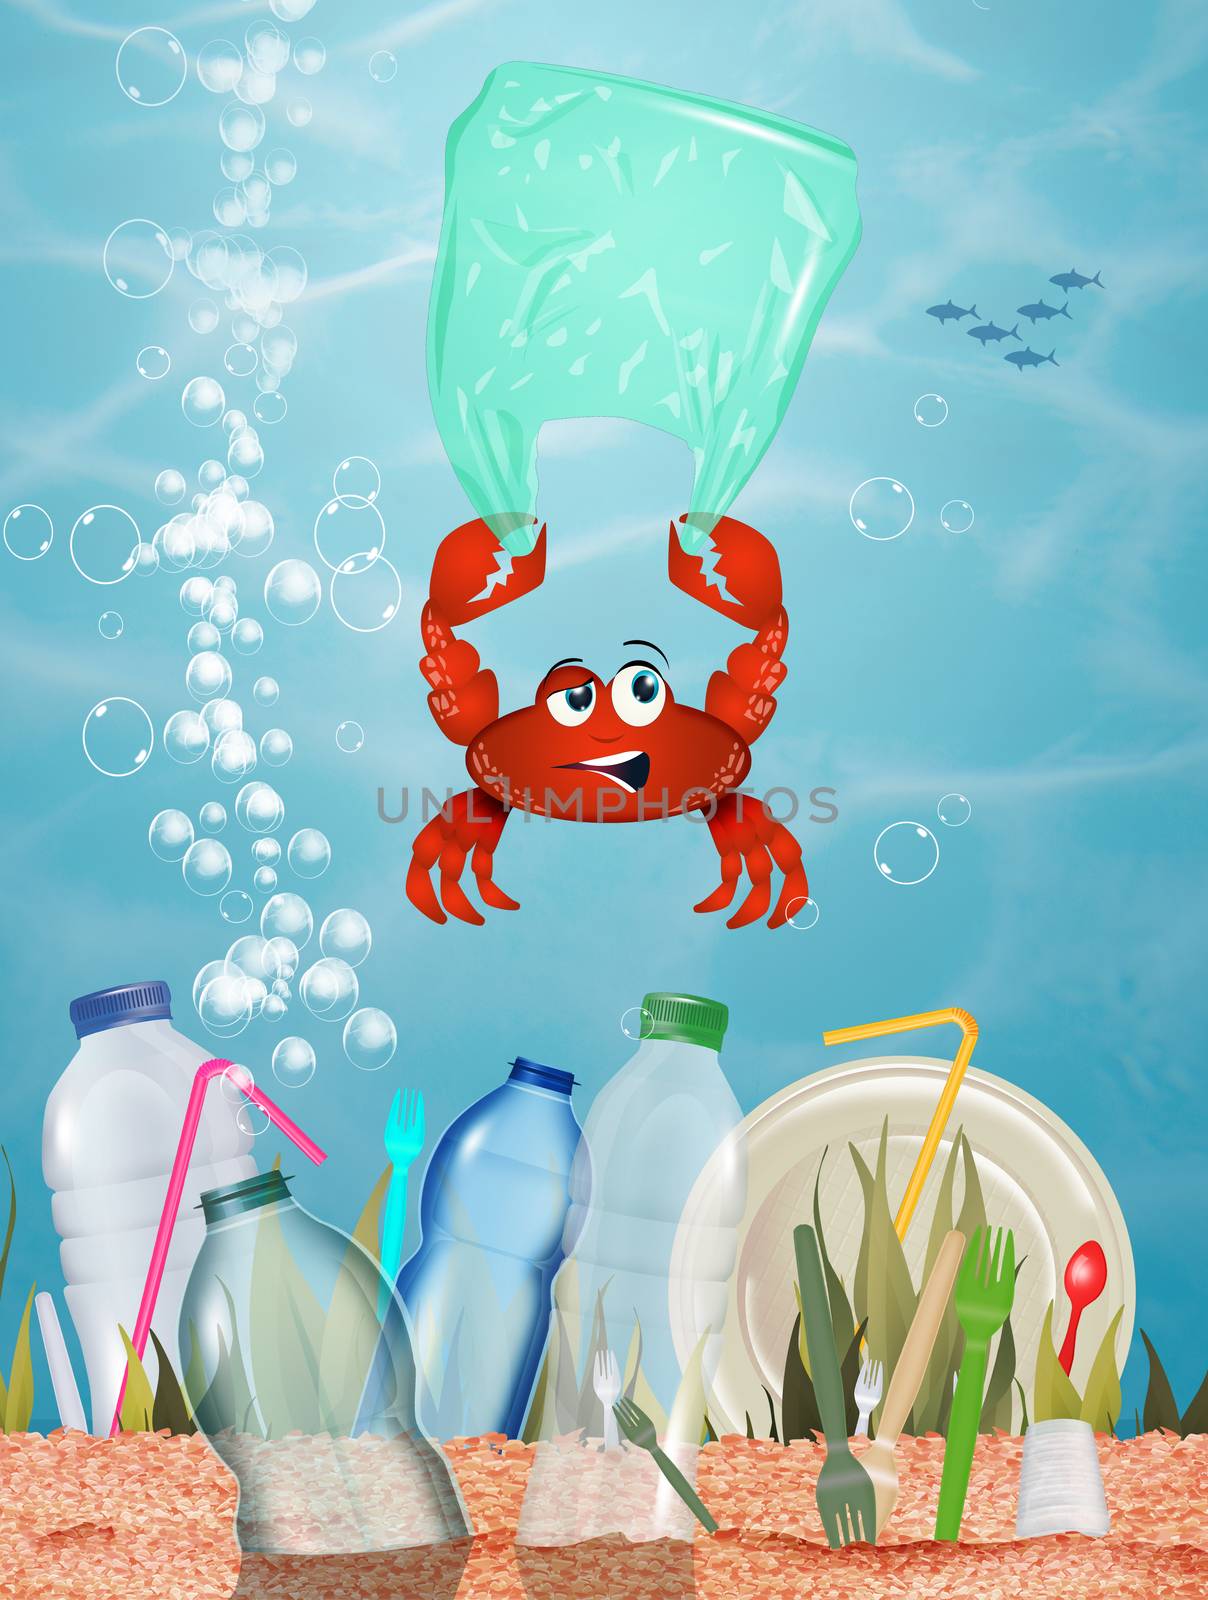 crab collects plastic in the sea by adrenalina